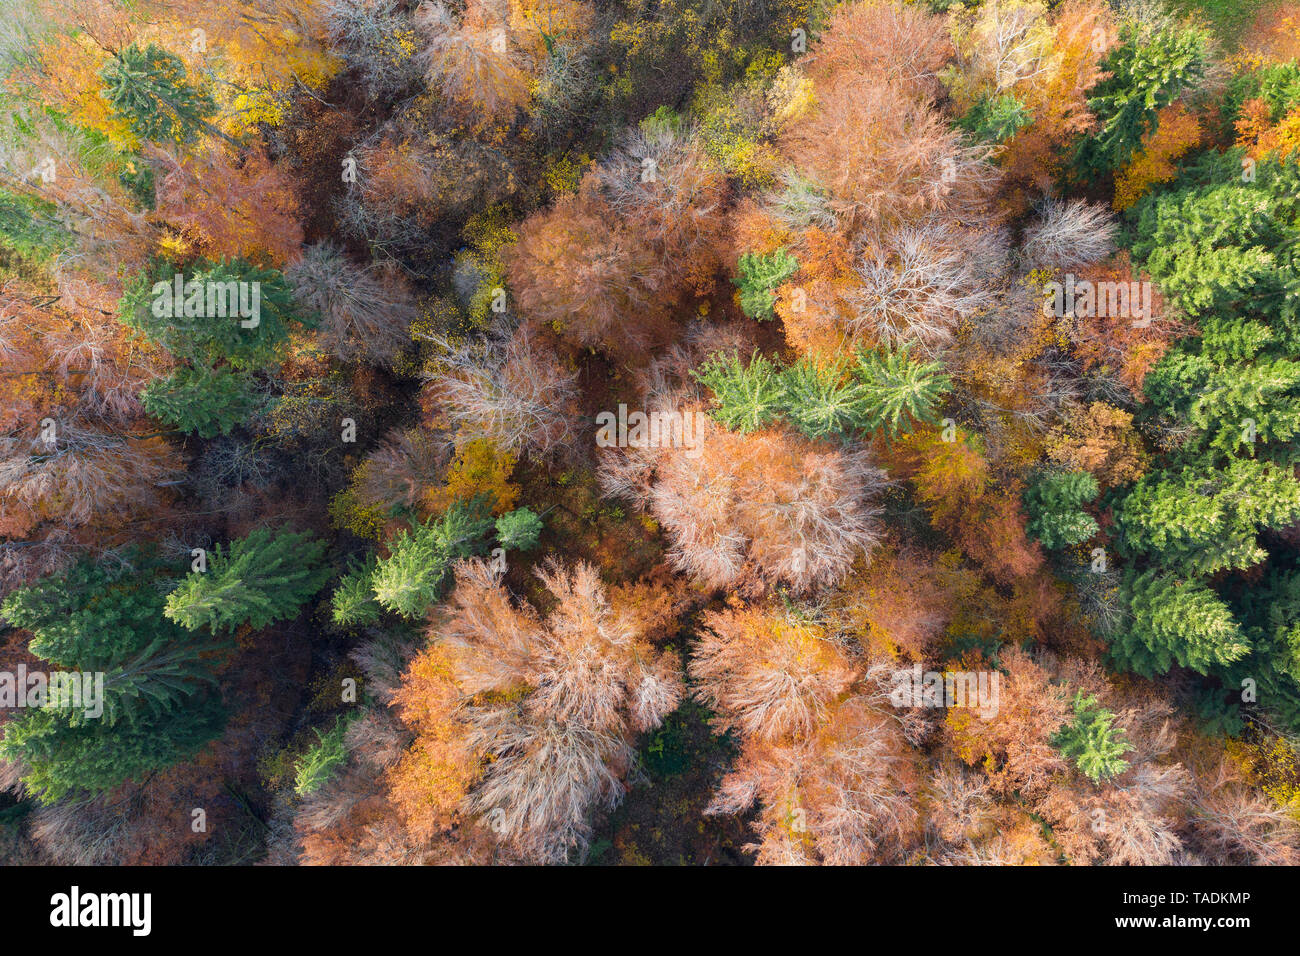 Germany, Bavaria, autumnal mixed forest near Icking, aerial view Stock Photo